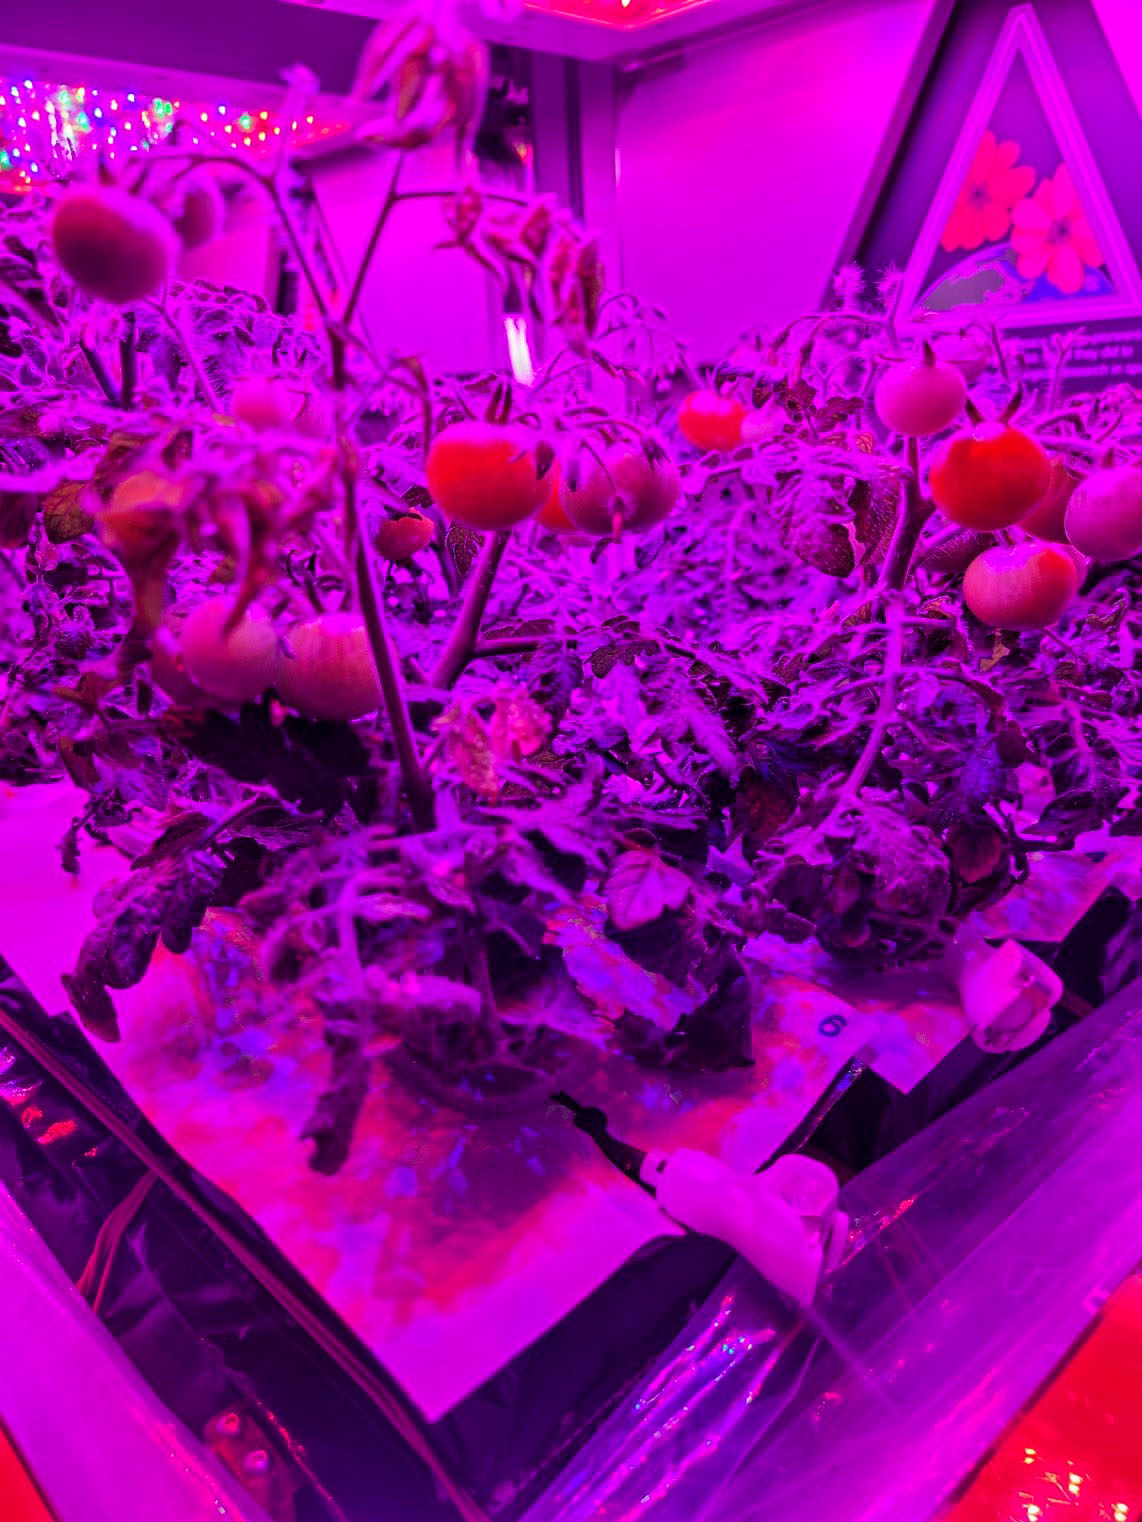 This preflight image shows the Red Robin dwarf tomato used for Veg-05 growing in Veggie hardware at the Kennedy Space Center. 